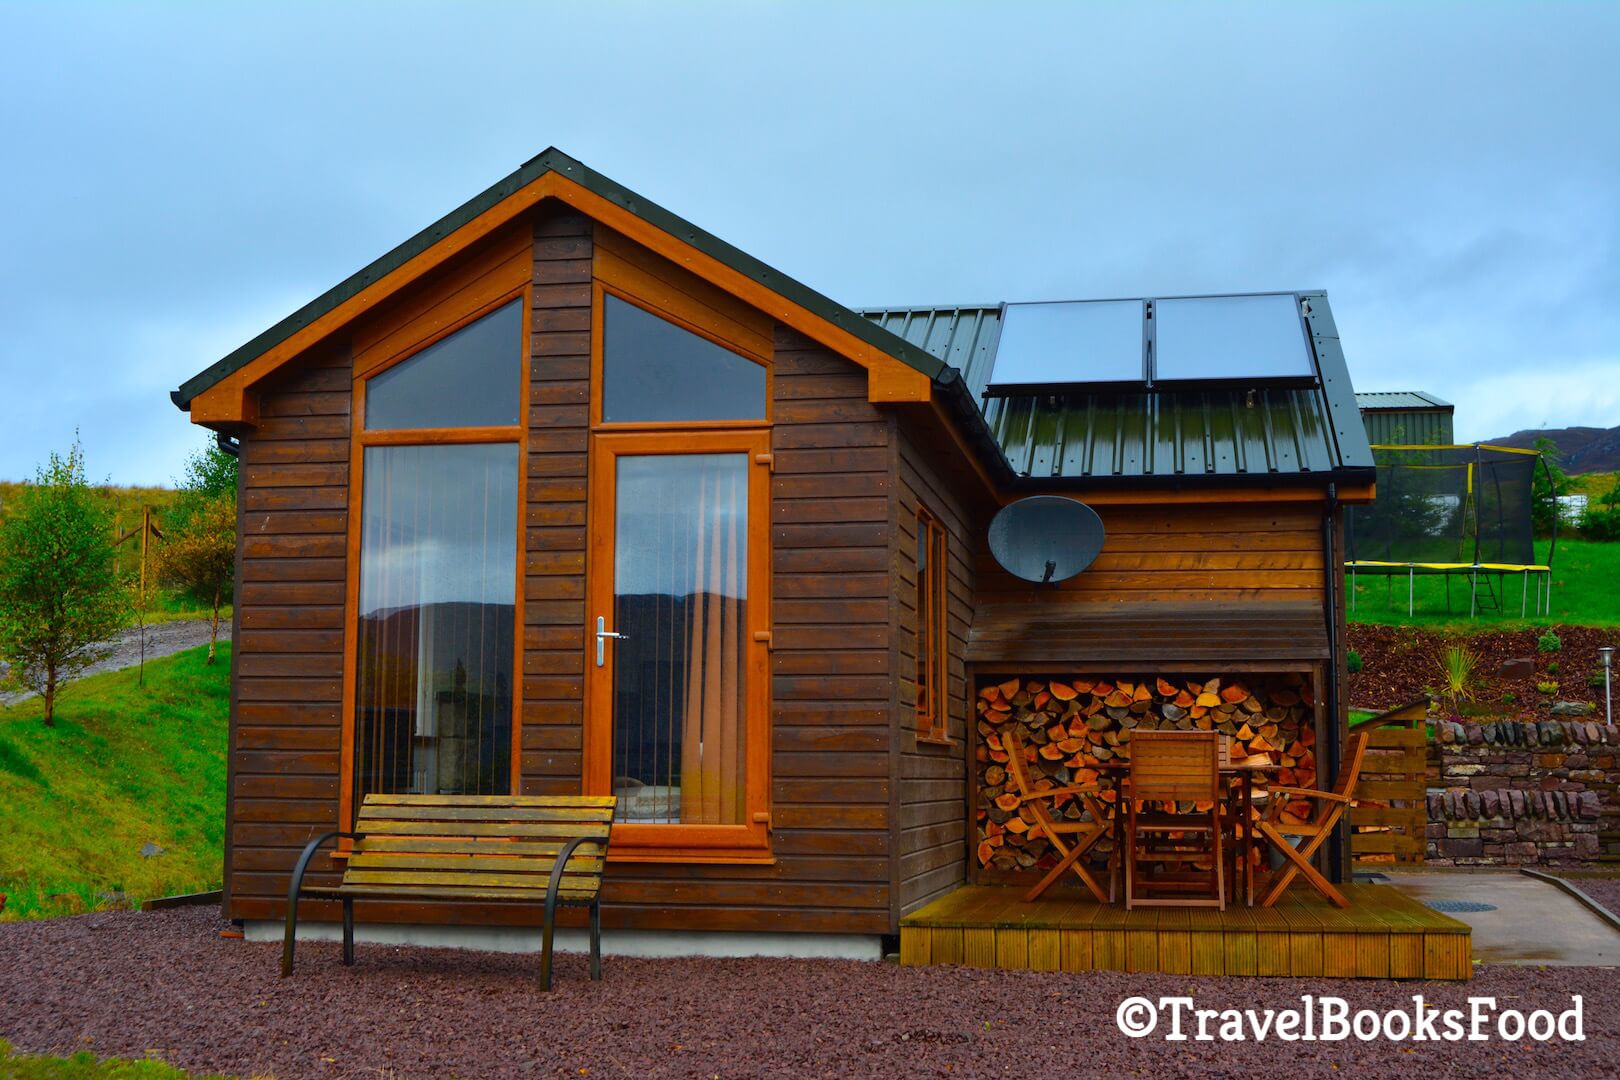 Our gorgeous wooden chalet/ cottage in Kyle of Lochalsh in Isle of Skye, Scotland. There are three chairs and a bench to enjoy the view of the first image.